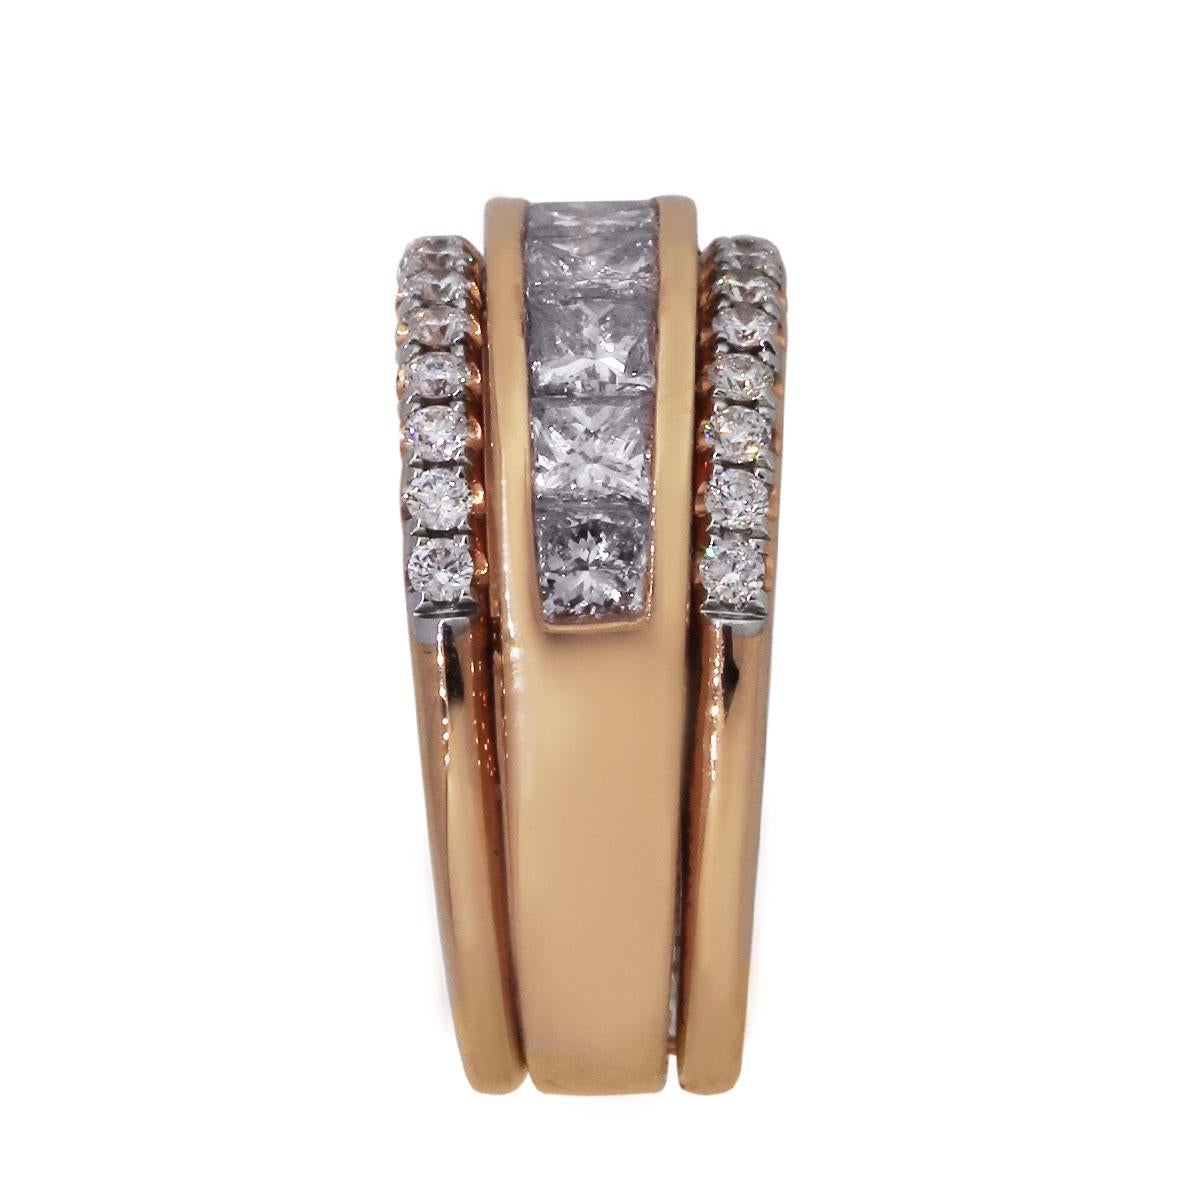 Material: 18k rose gold
Diamond Details: Approximately 0.40ctw of round brilliant diamonds, 28 stones. Approximately 1.38ctw of princess cut diamonds, 9 stones. Diamonds are G/H in color and VS in clarity
Ring Size: 6.50 (can be sized)
Ring